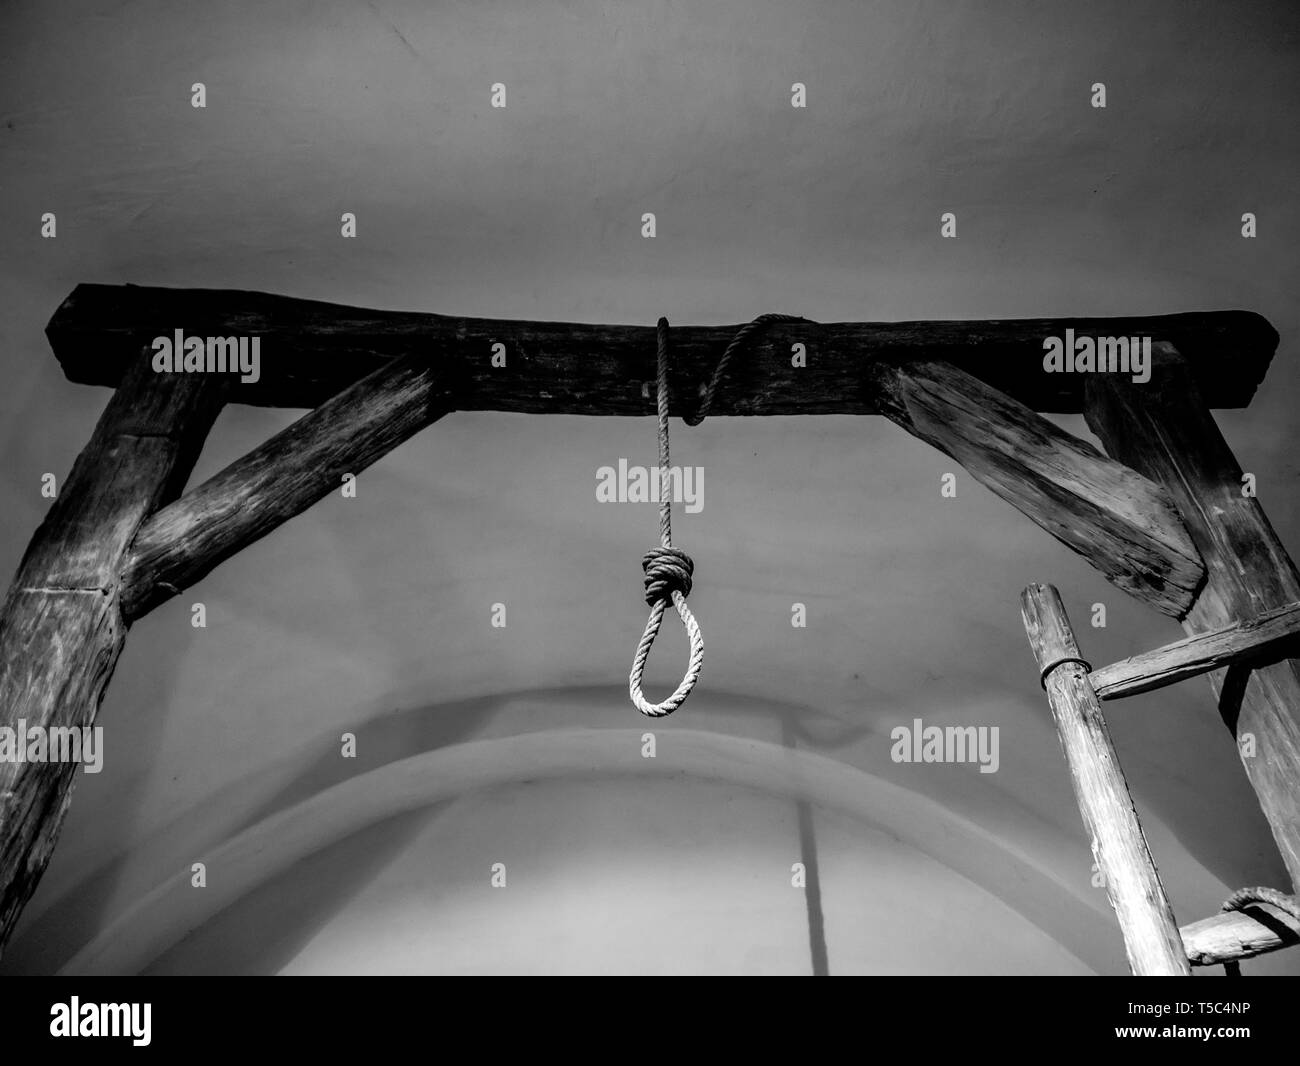 VARPALOTA, HUNGARY - APRIL 13, 2019: View on a gallows tree in the Thury castle in Varpalota, Hungary. Stock Photo